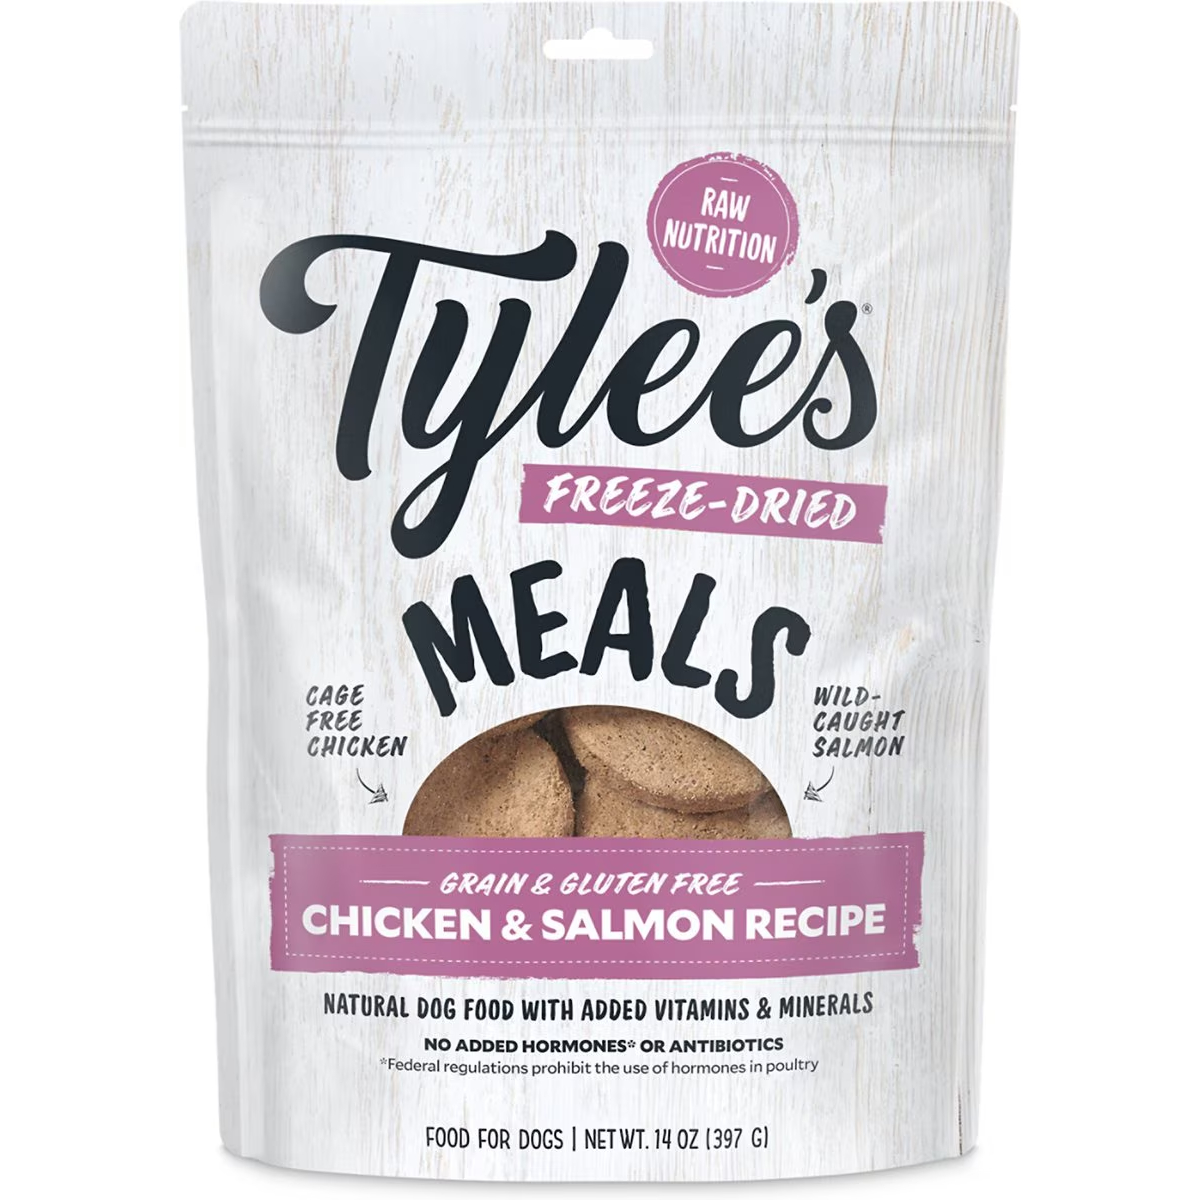 Tylee’s Freeze-Dried Meals For Dogs